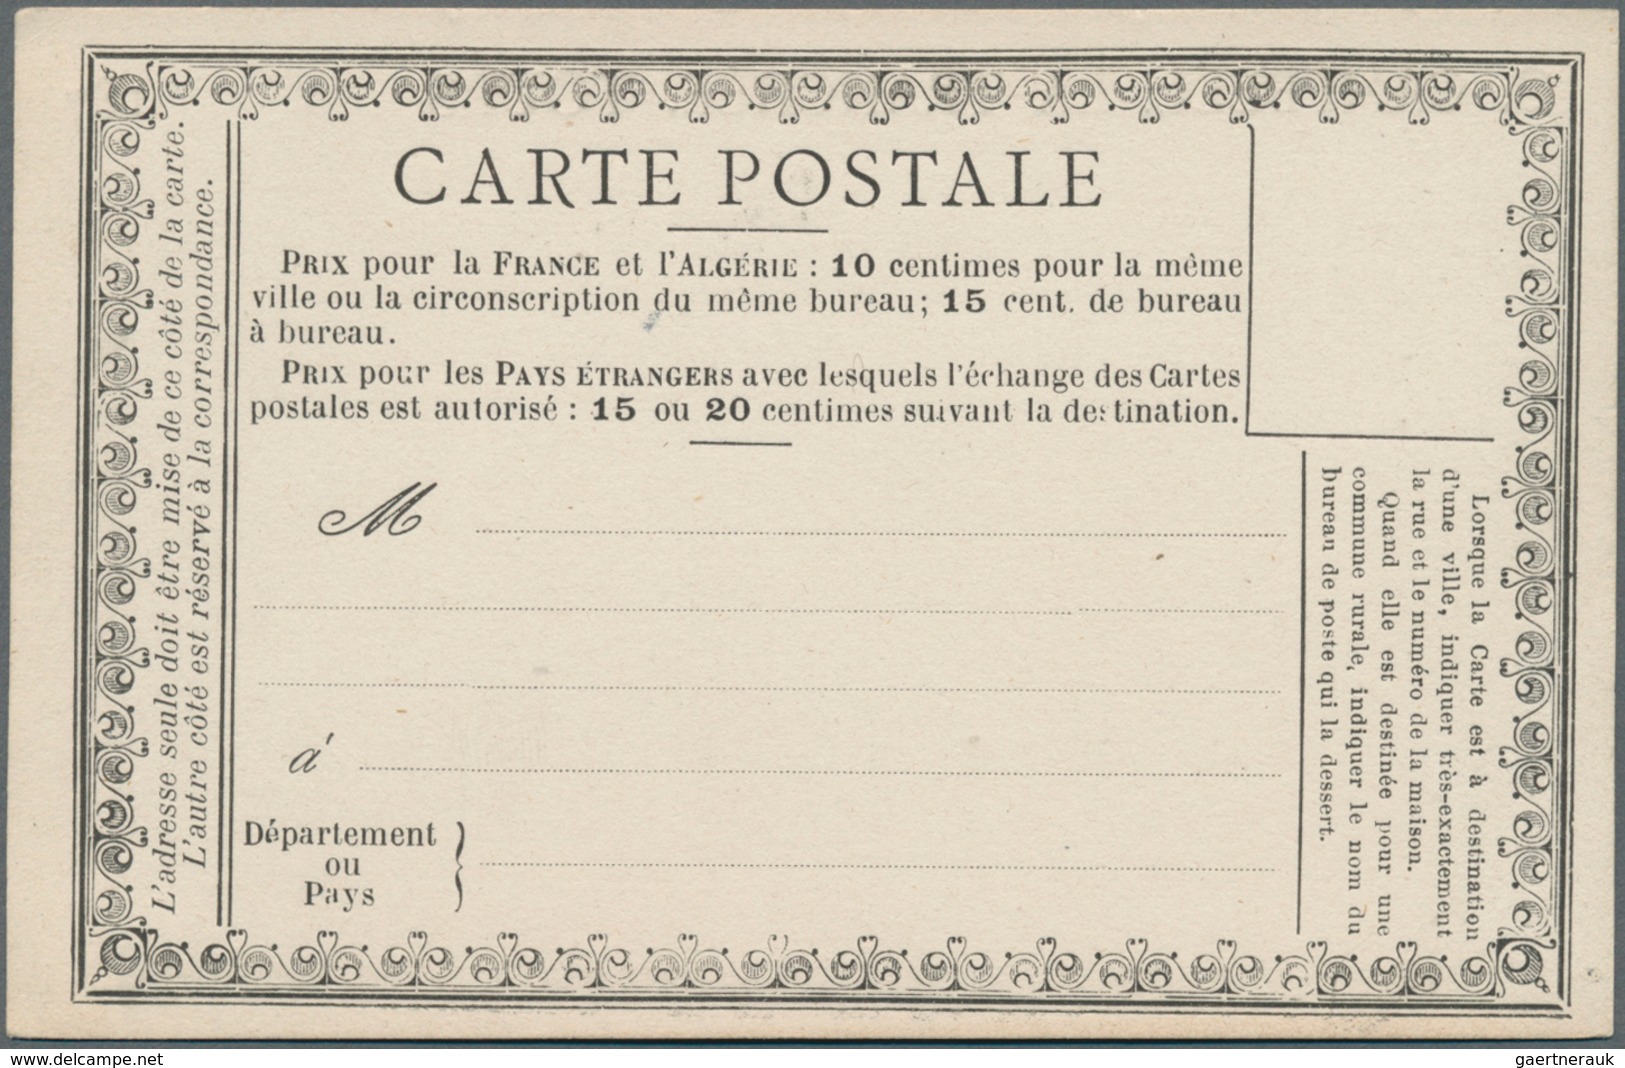 Frankreich - Ganzsachen: 1874/1878, assortment of 56 stationery forms "type 1873" used and unused in